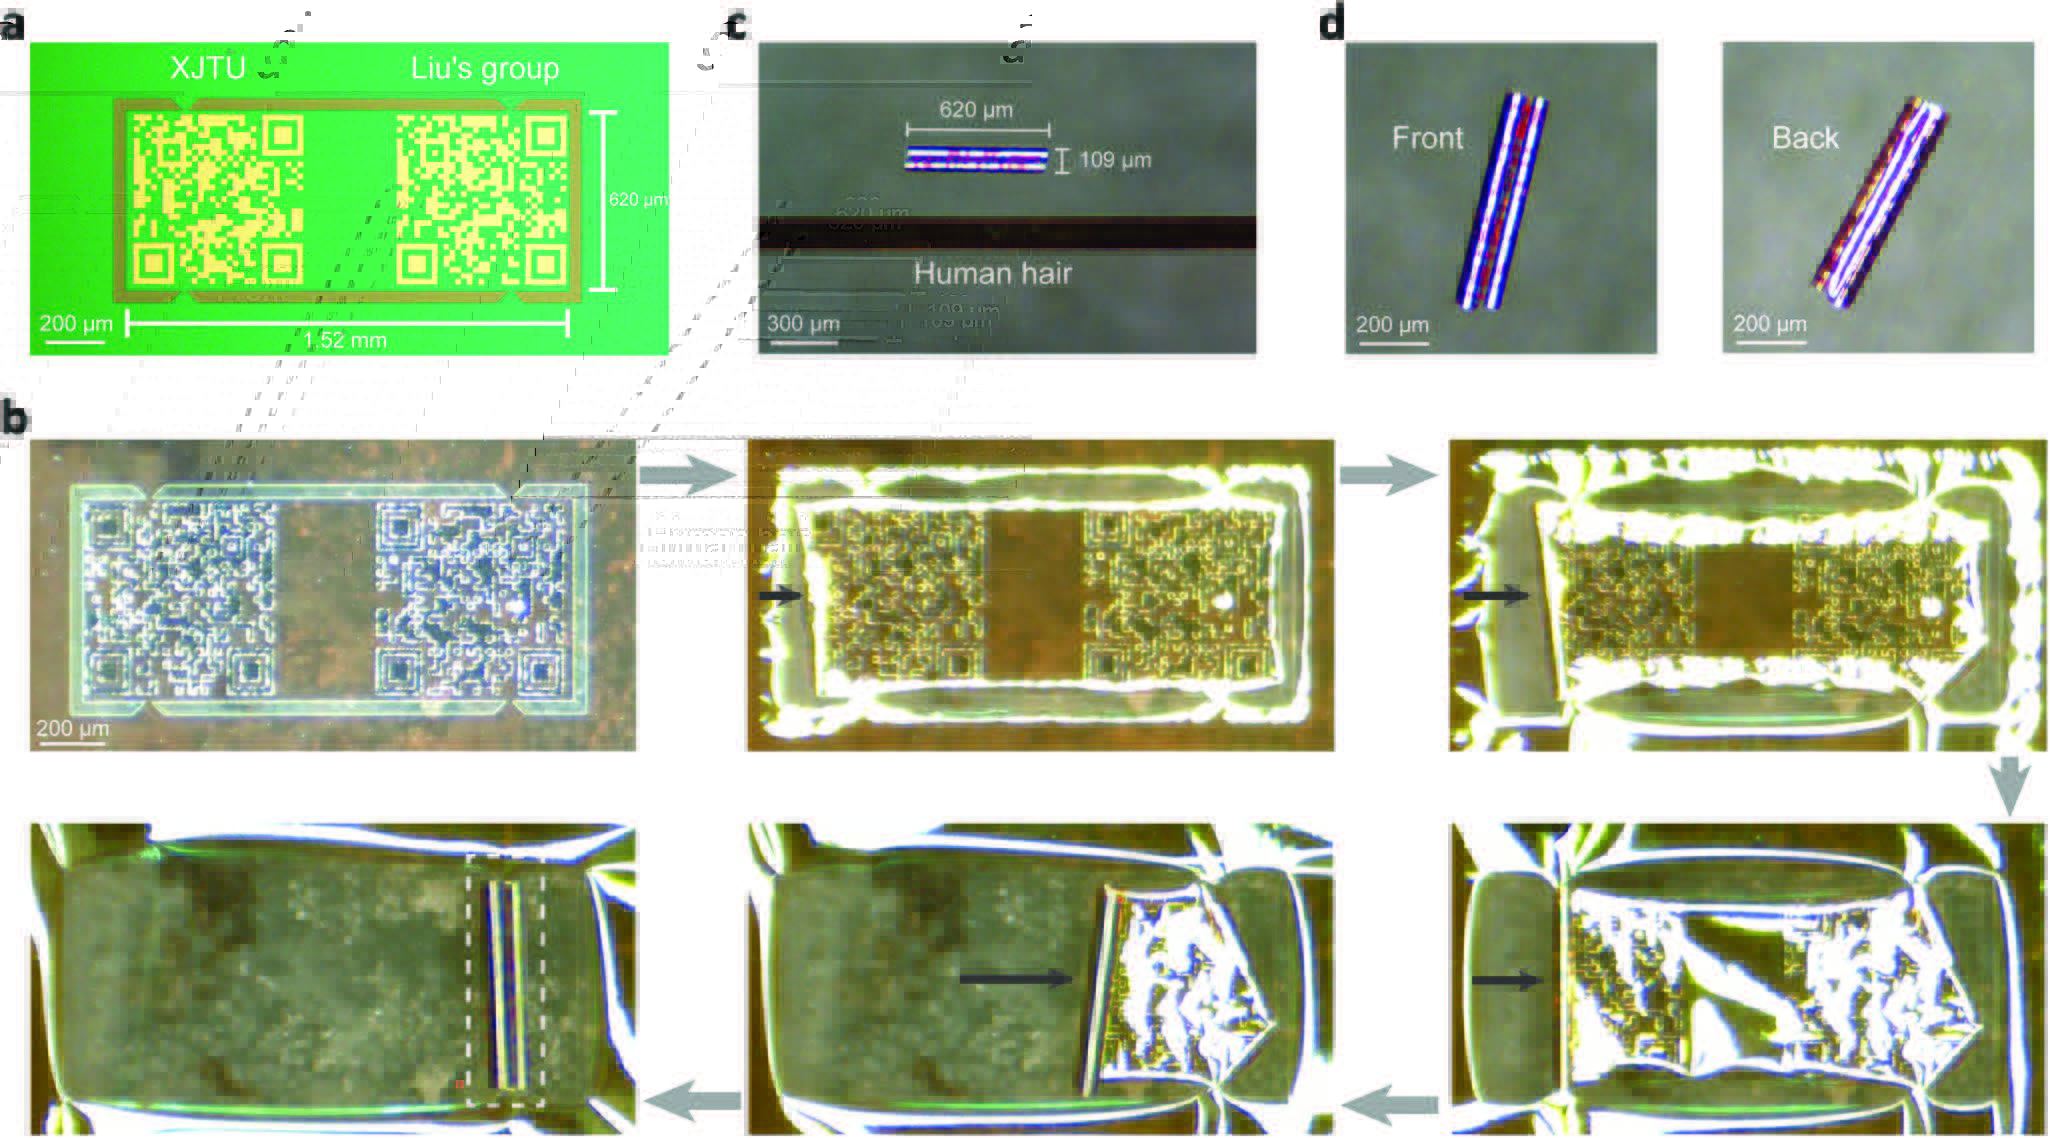 Self-rolling-up enabled high-density information storage in ferroic oxide membranes